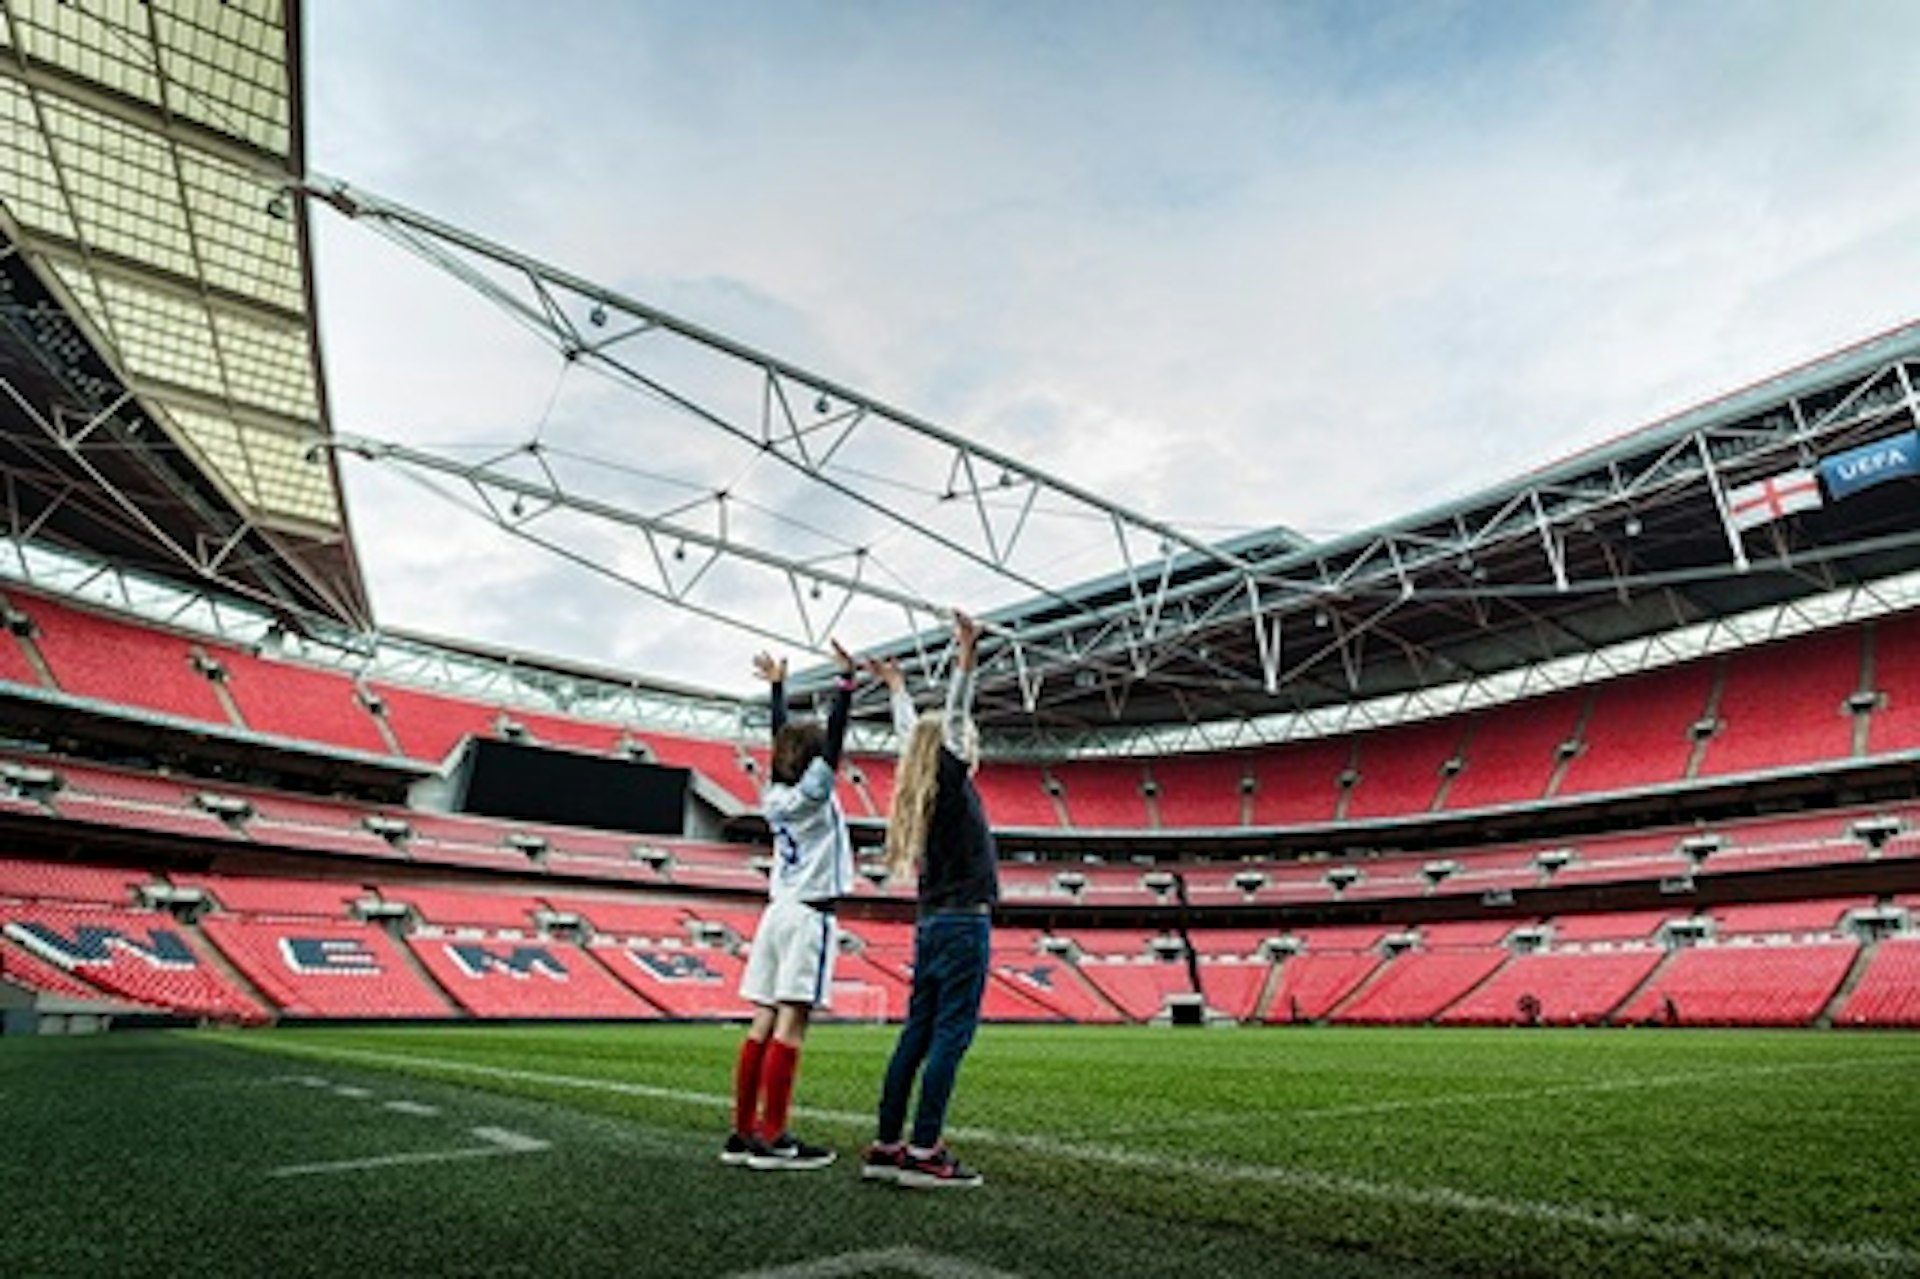 Wembley Stadium Tour for One Adult and One Child 3